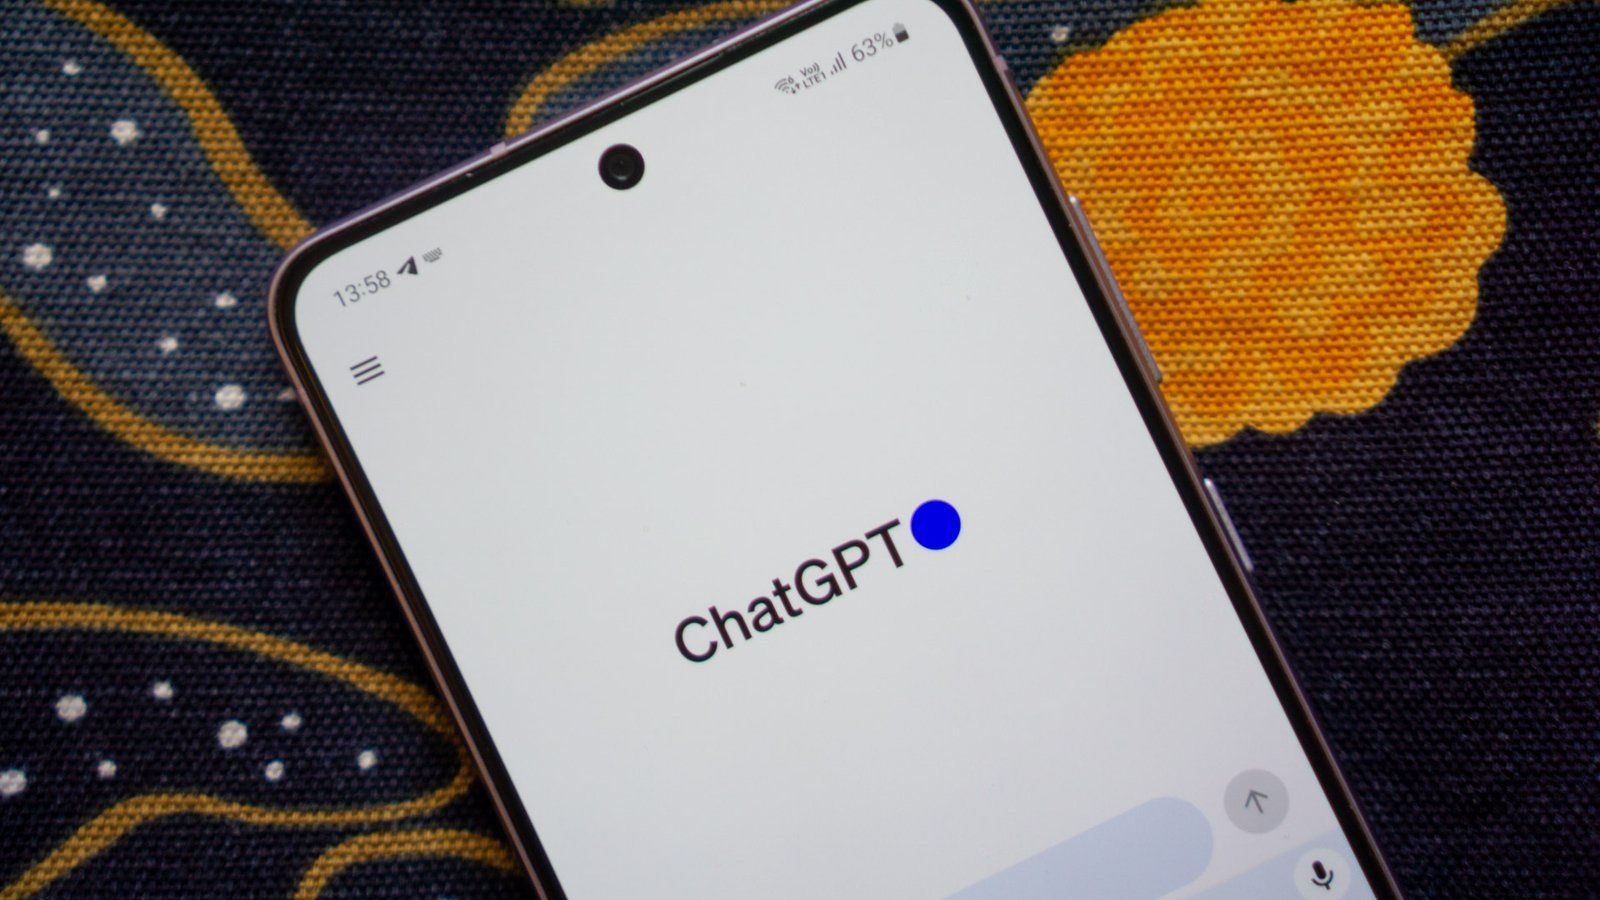 Would you use a ChatGPT-based search engine?